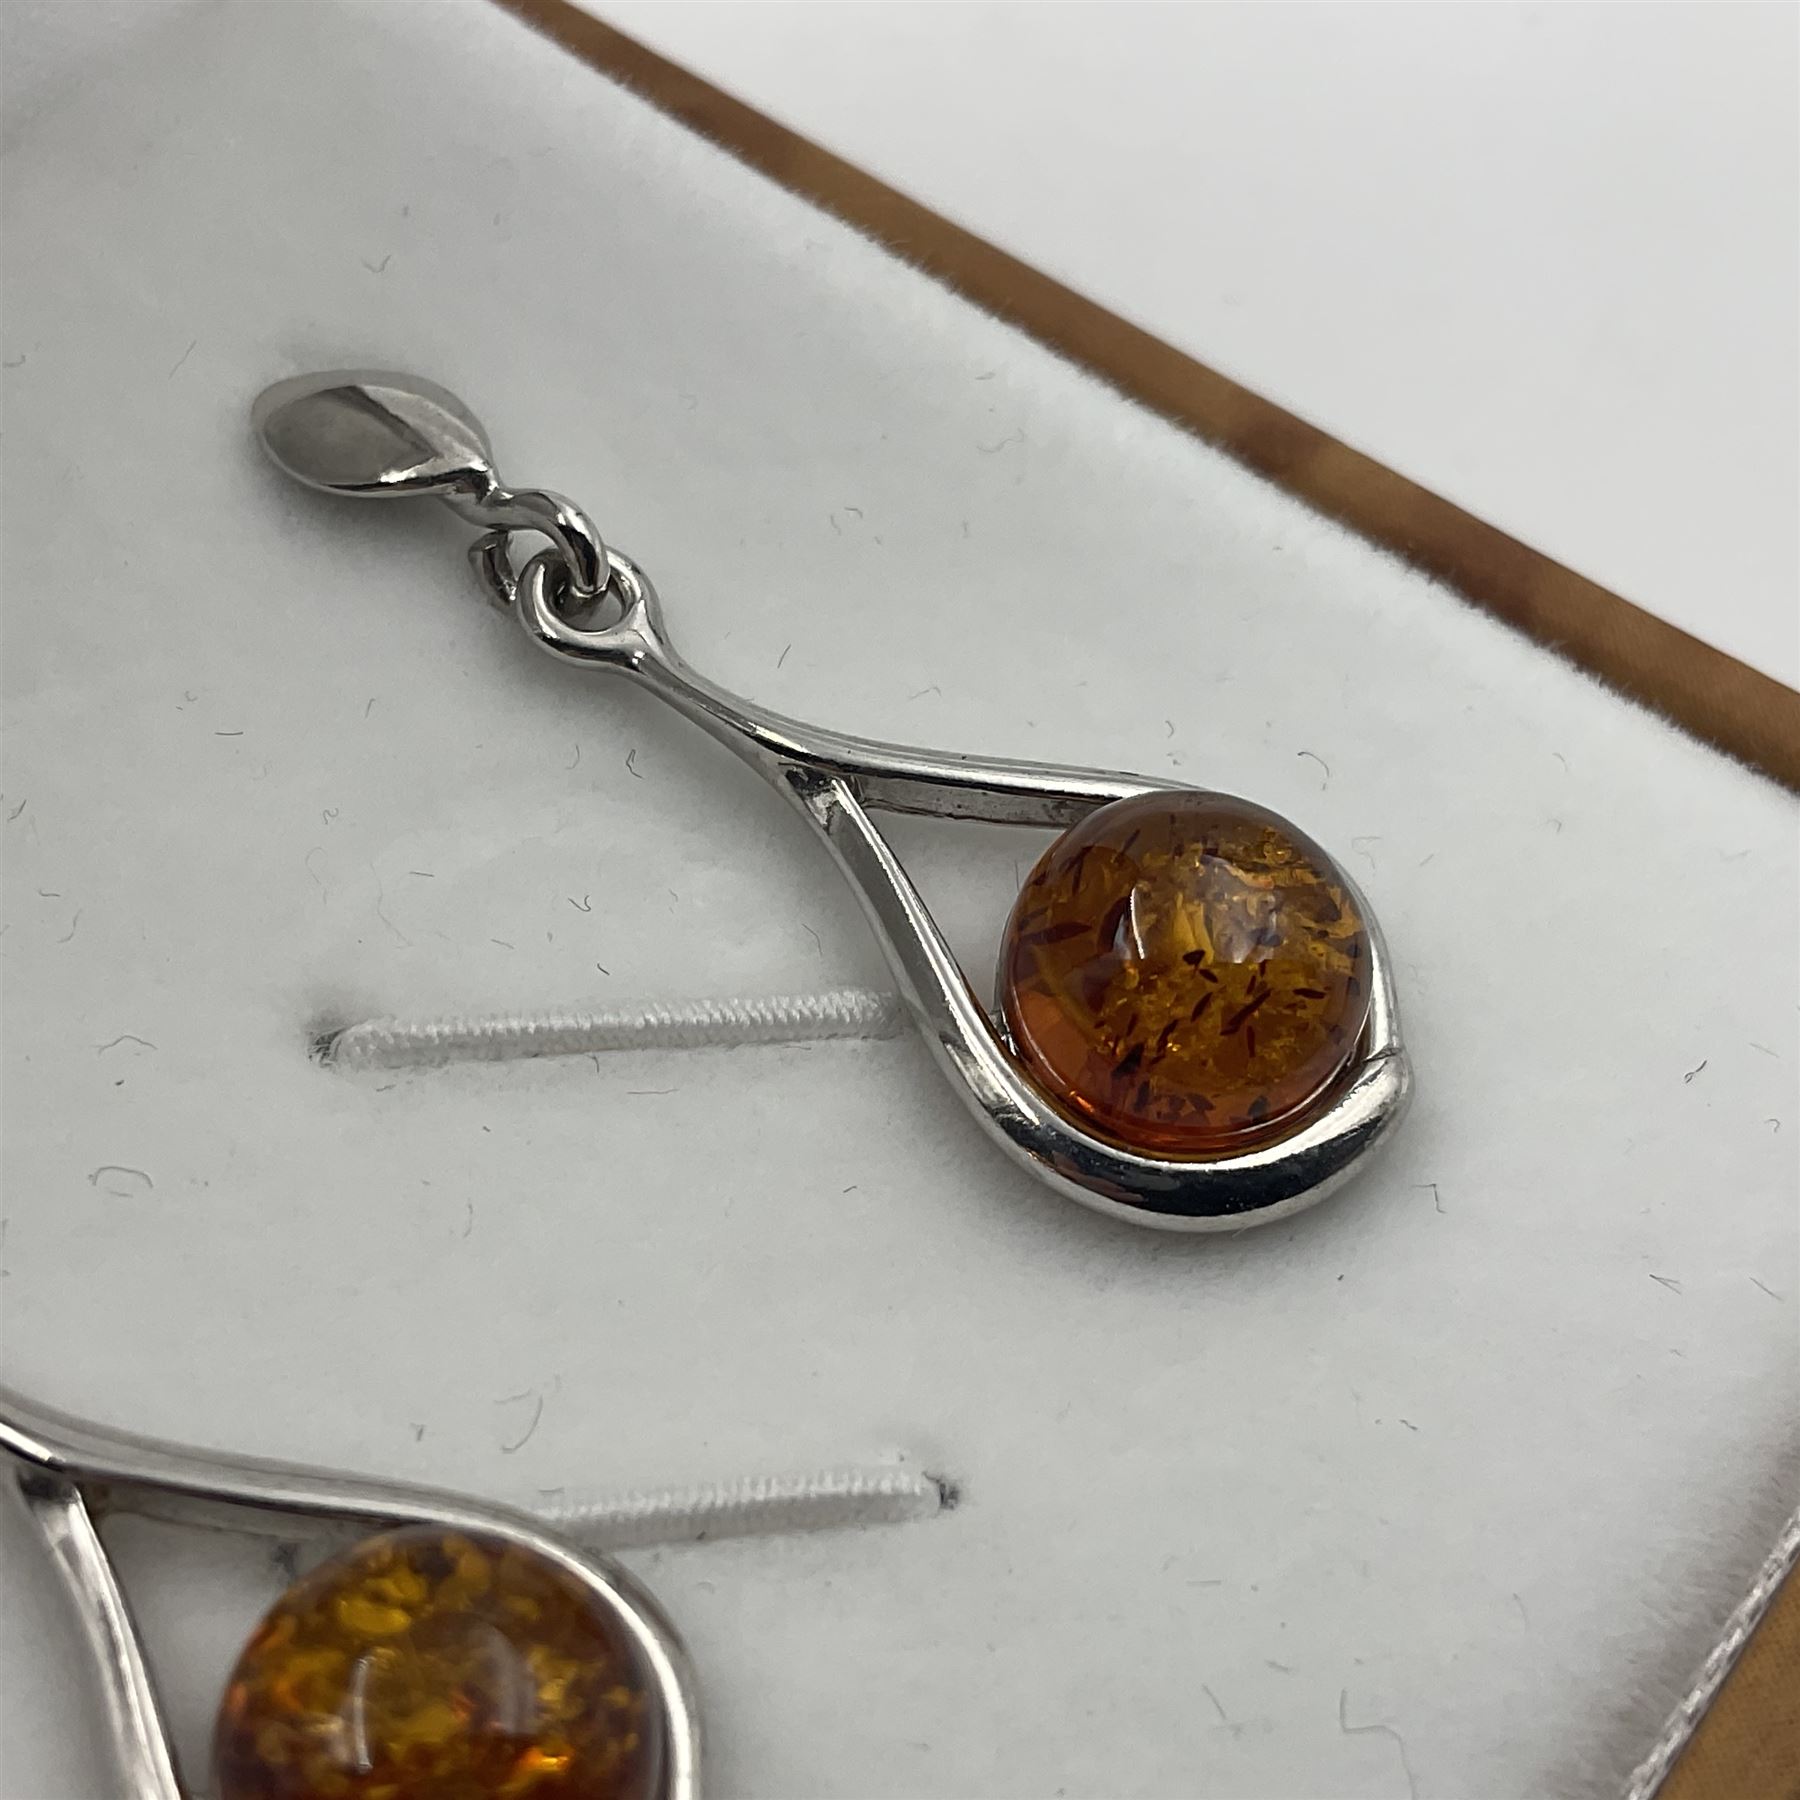 Pair of silver Baltic amber pendant earrings - Image 2 of 5